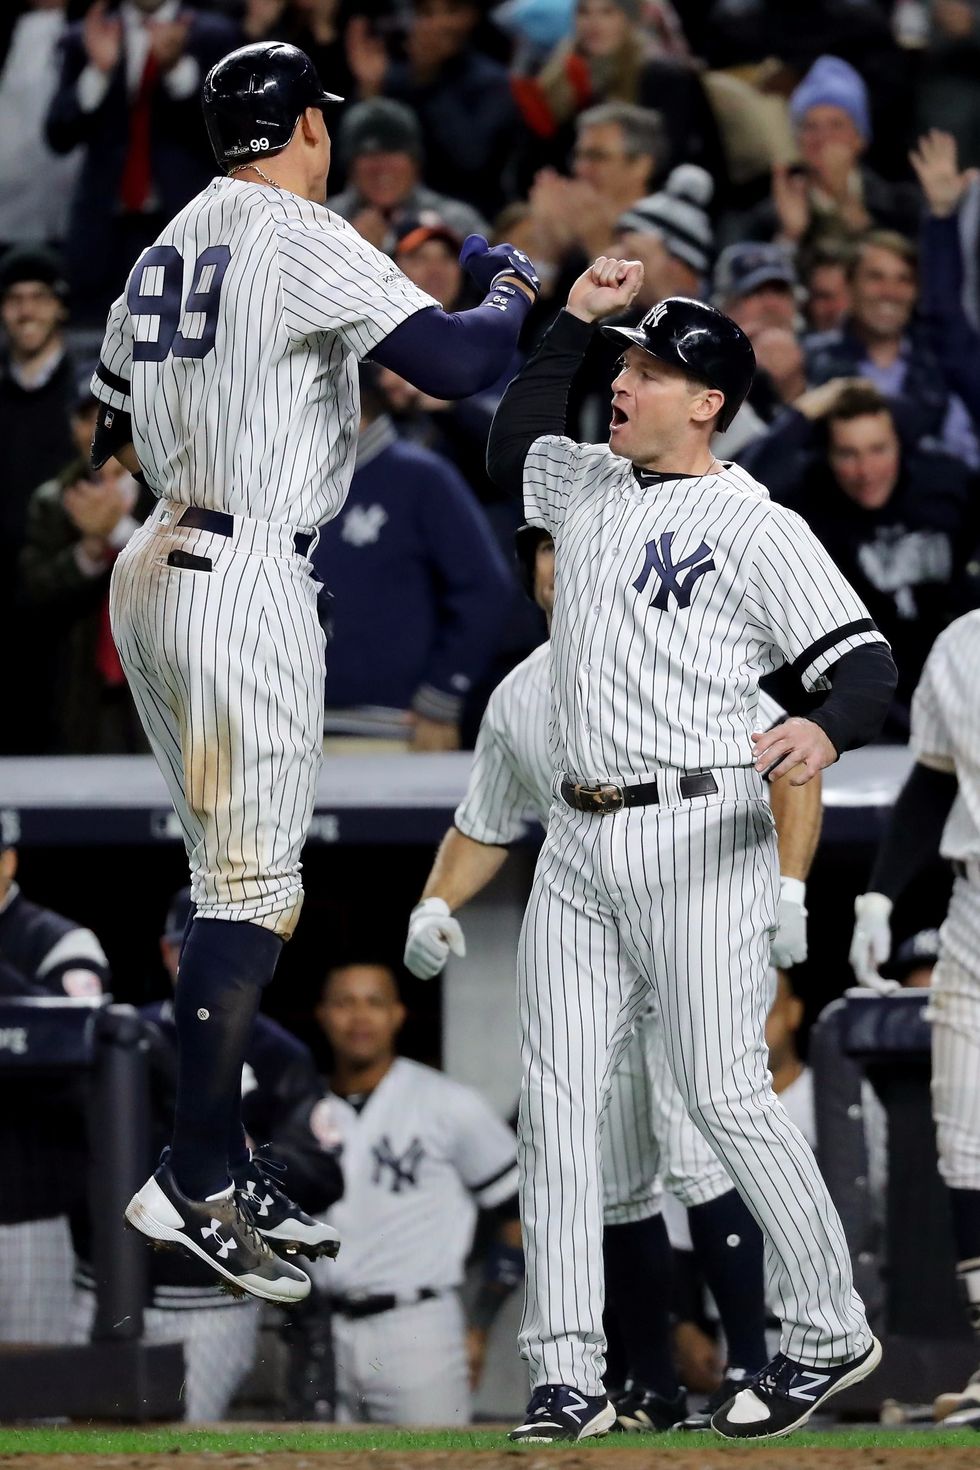 Astros-Yankees: HRs lead New York to 8-1 win; Astros lead series 2-1